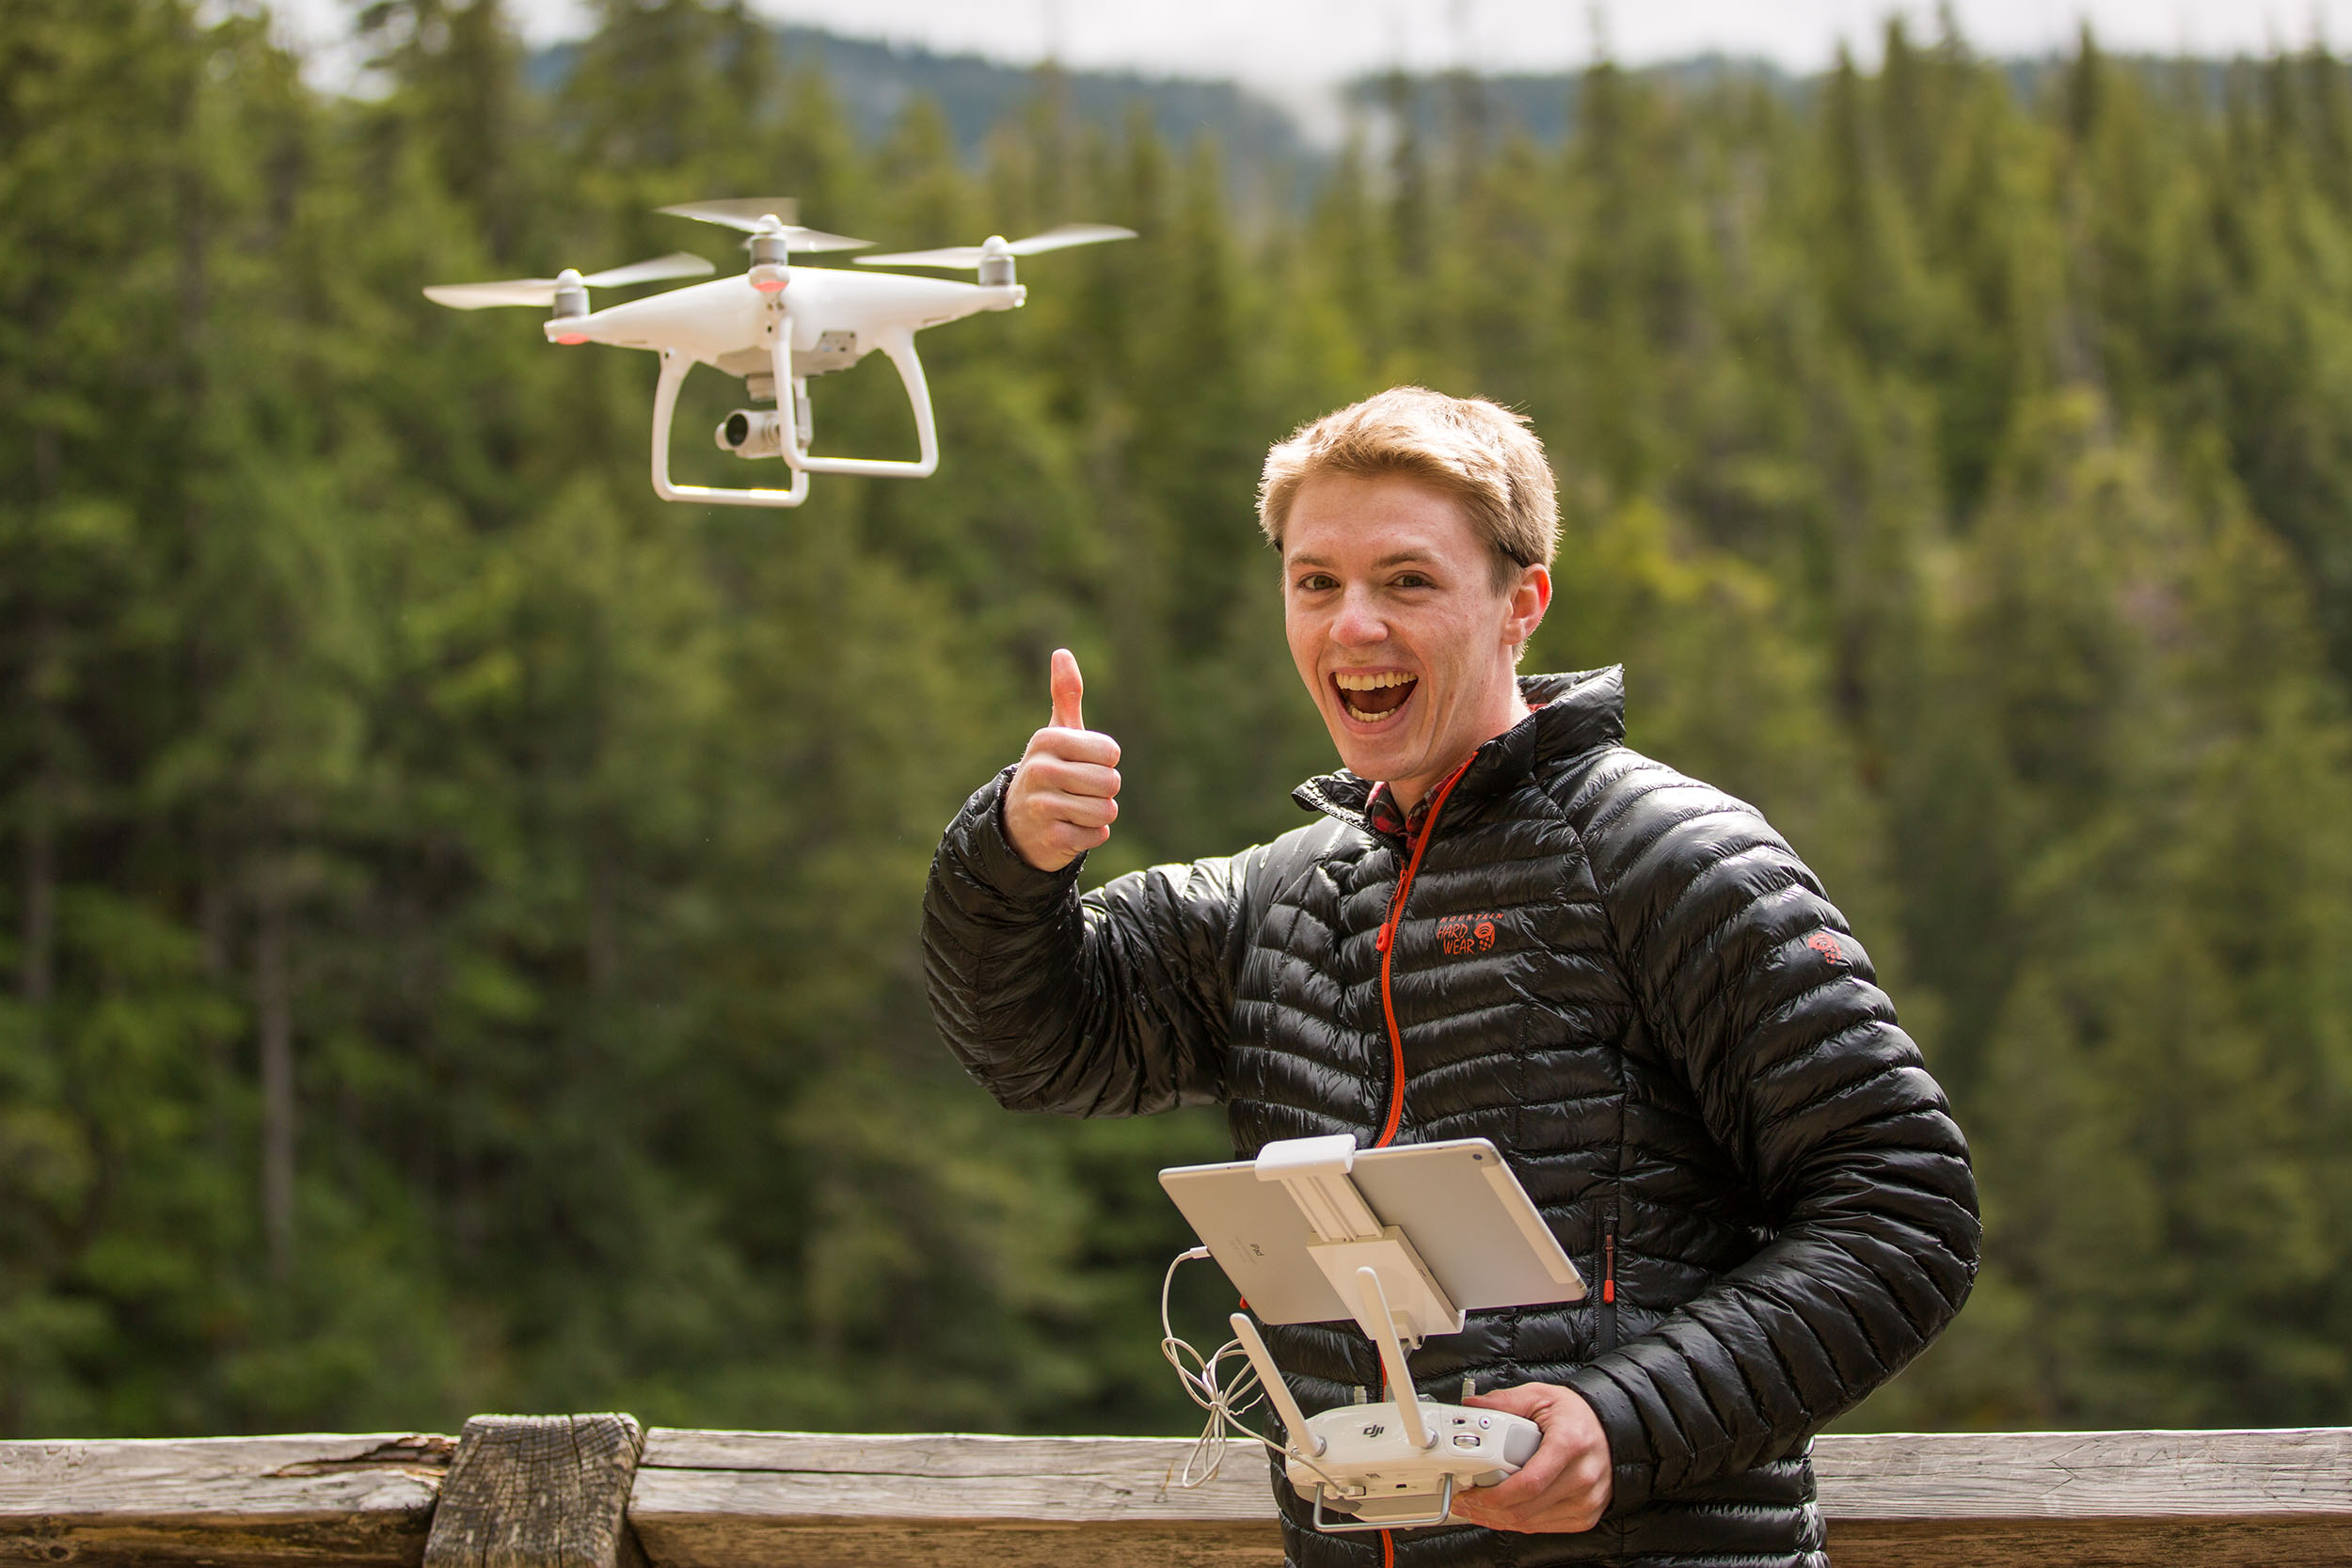 Brody Swisher gives the thumbs up while out flying his drone at Salt Creek Falls, Oregon during the Spring of 2016.